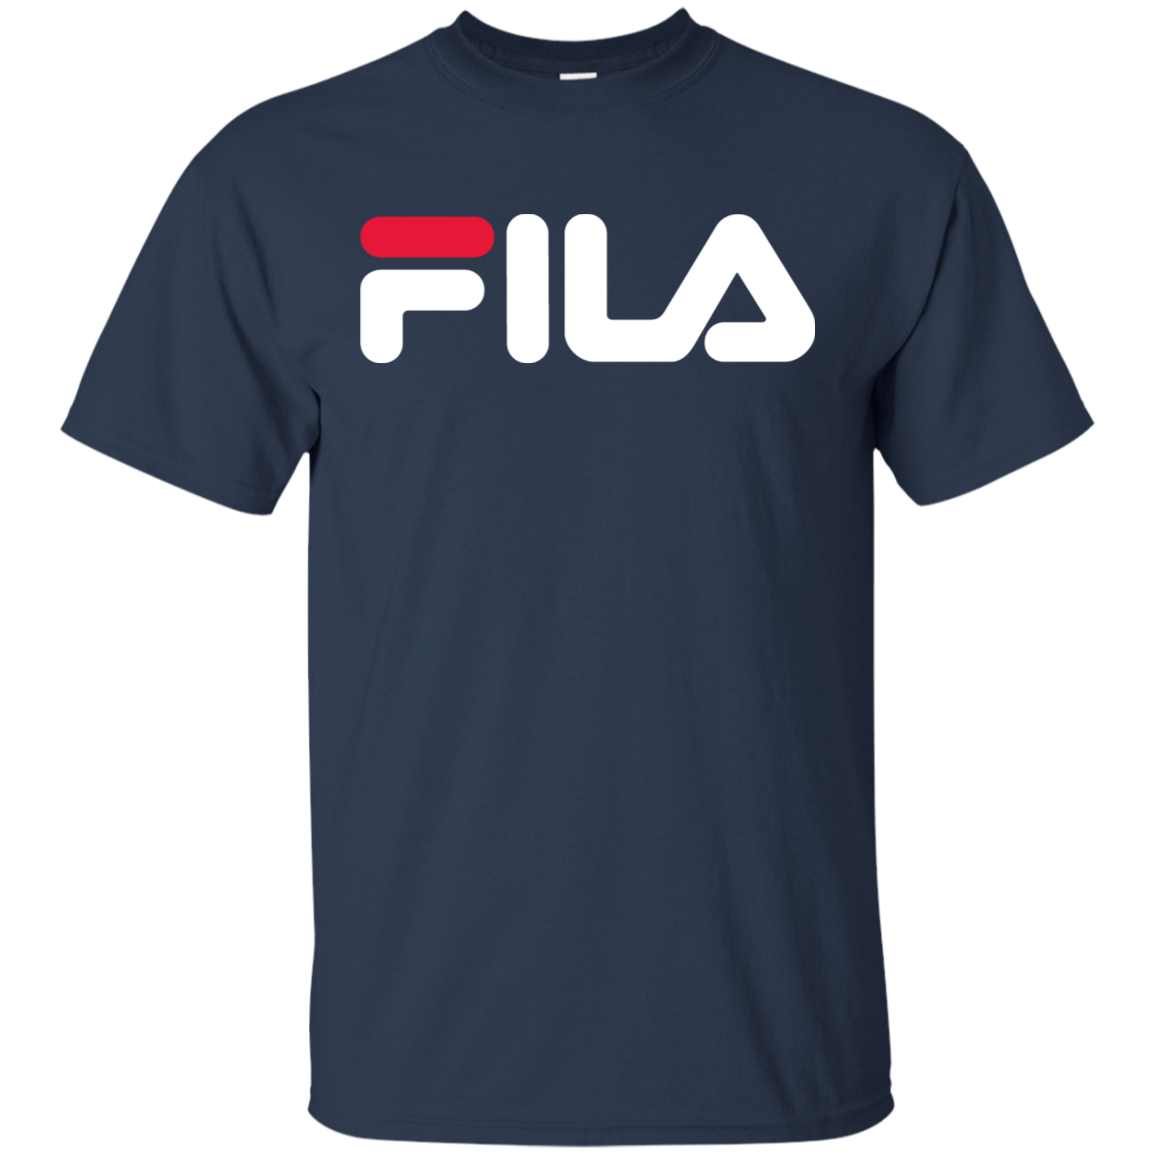 fila red white and blue shirt